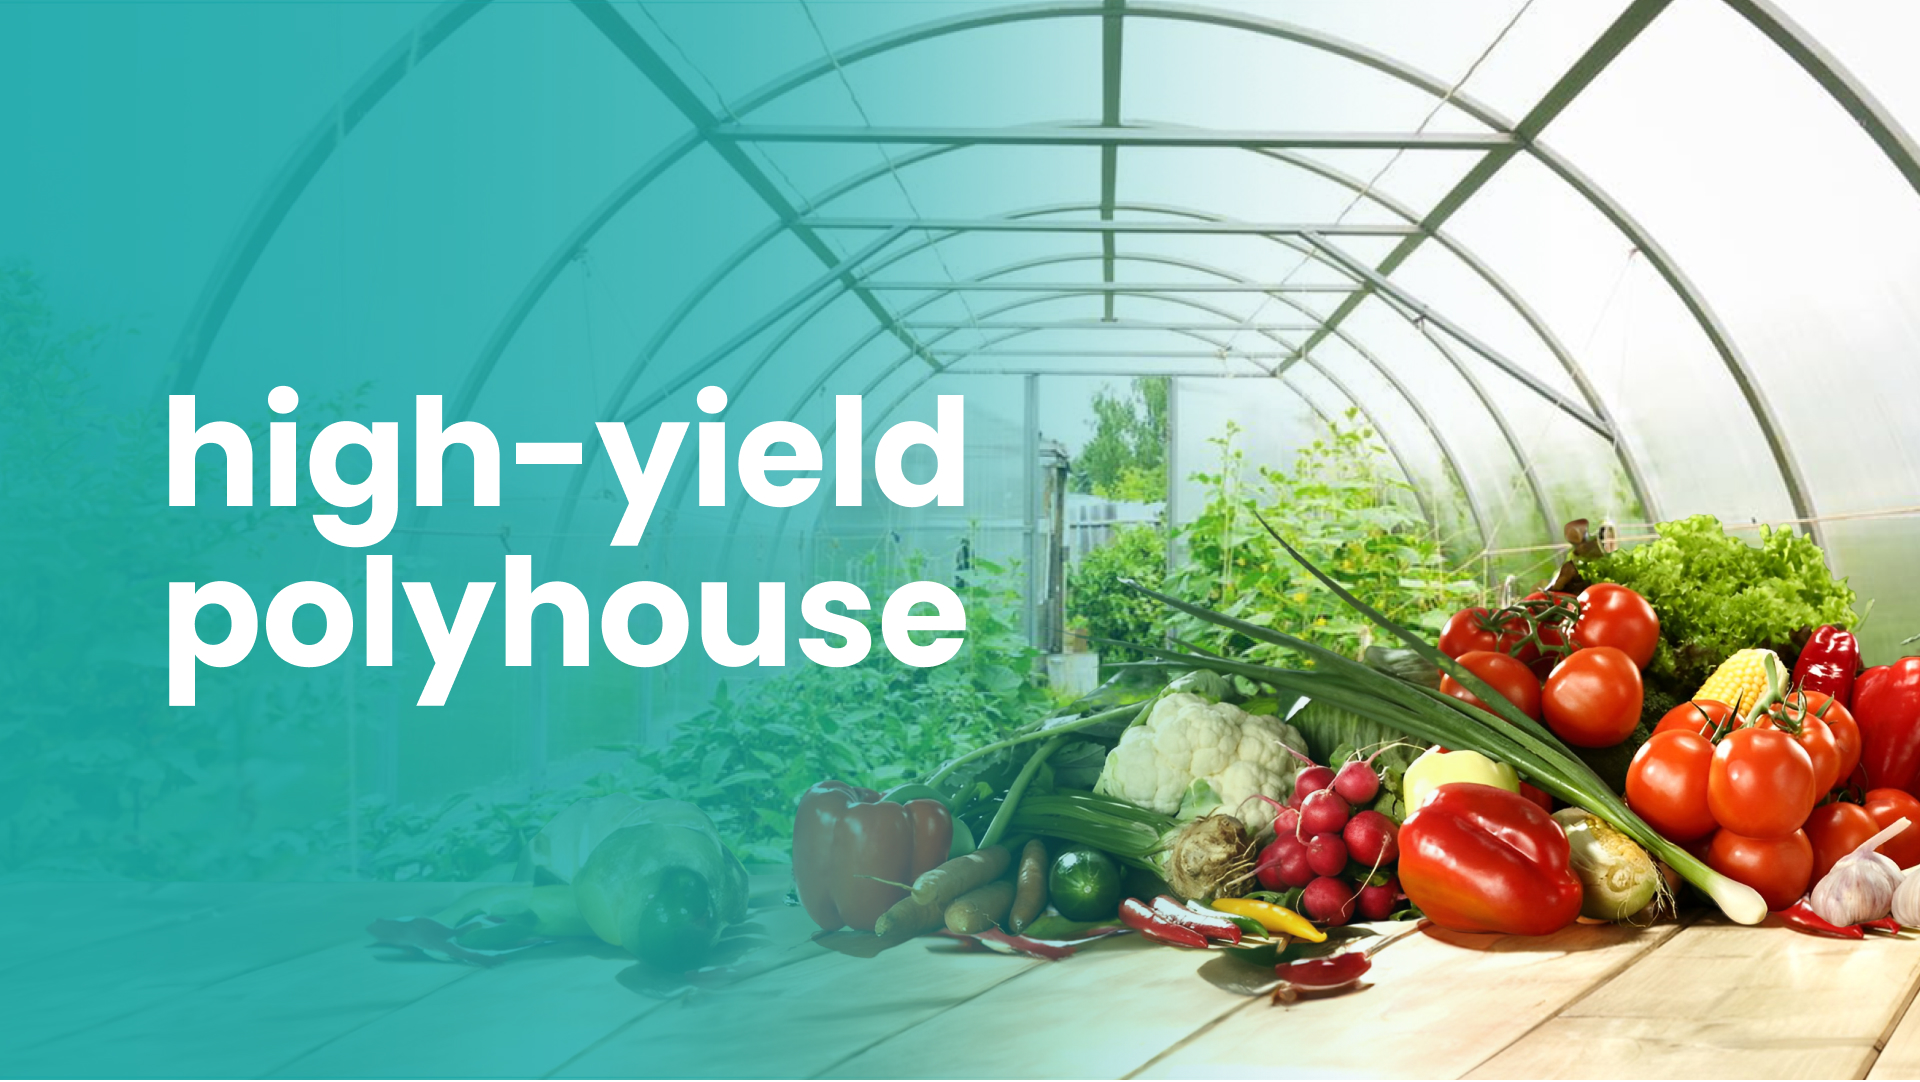 Course Trailer: Polyhouse Vegetable Farming - Earn up to 40 Lakhs/Acre. Watch to know more.